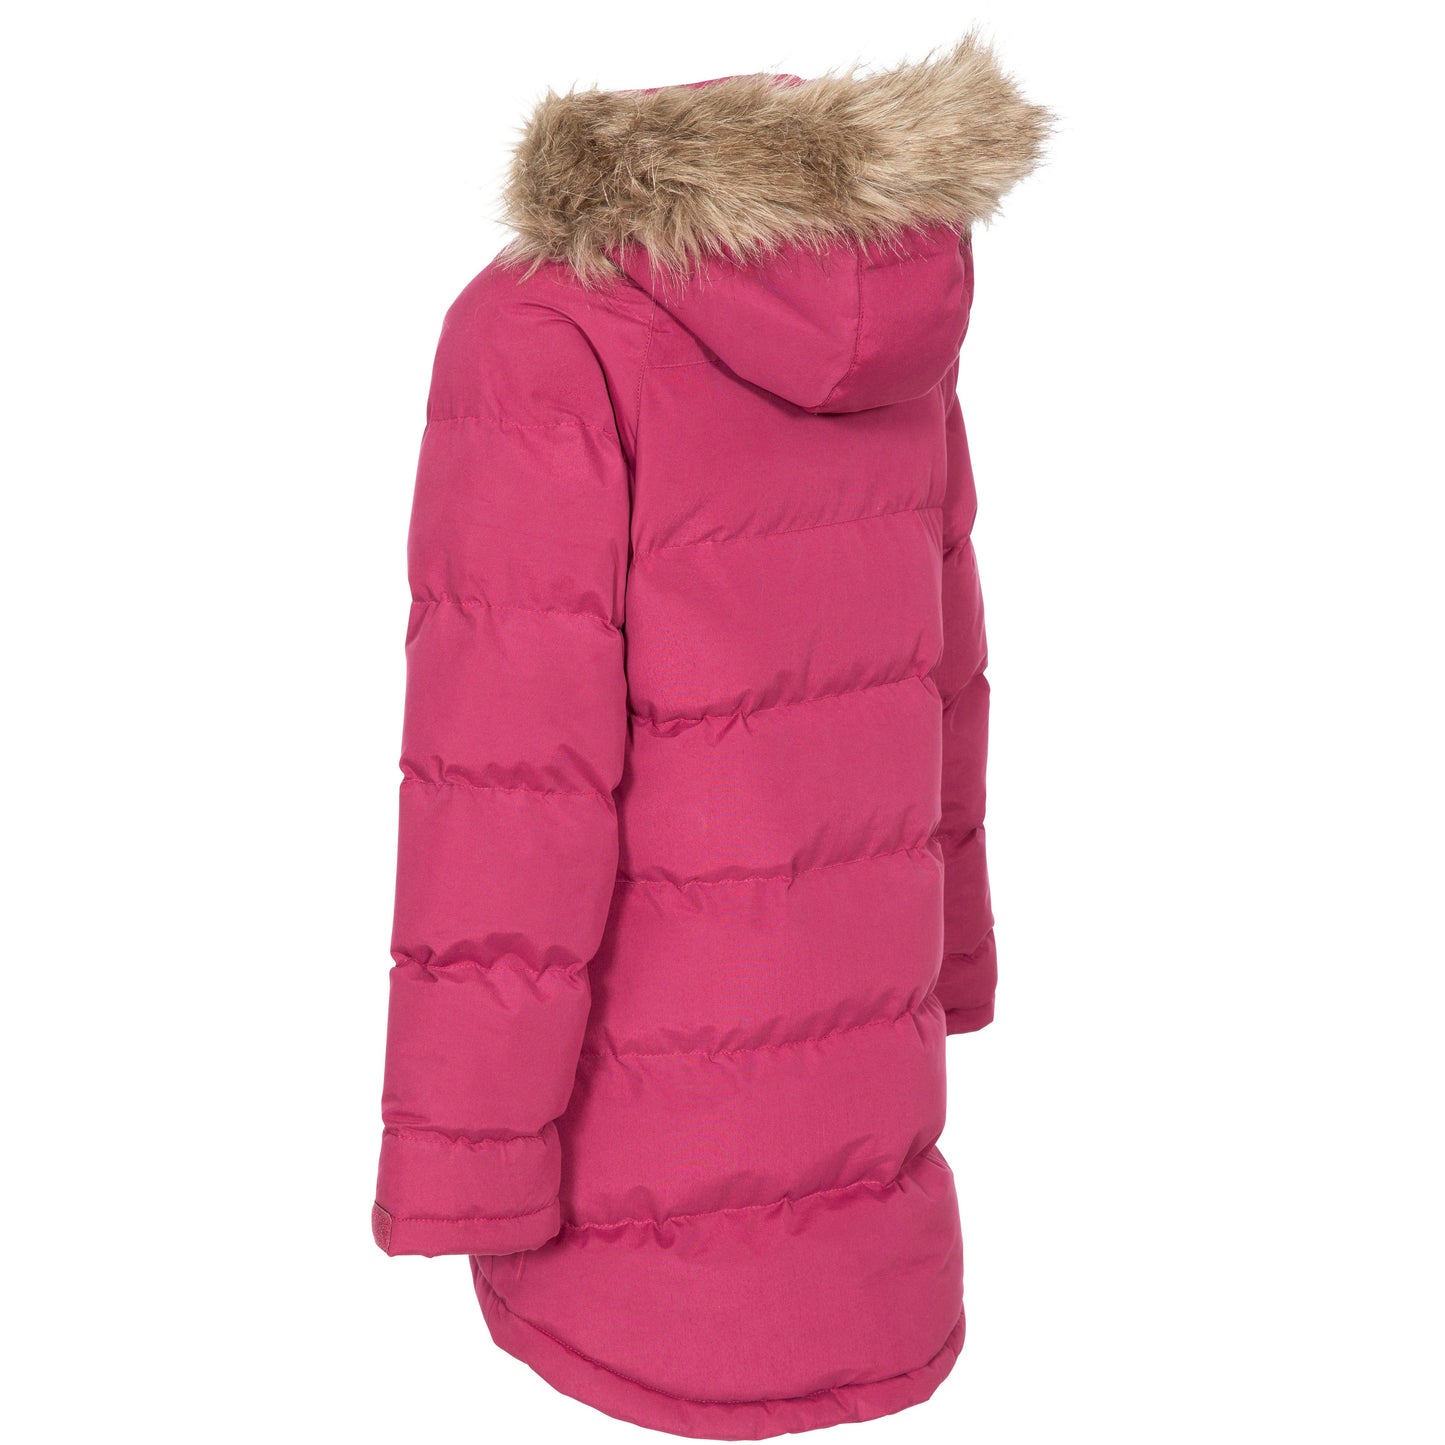 Unique Girls' Water Resistant Padded Jacket - Berry